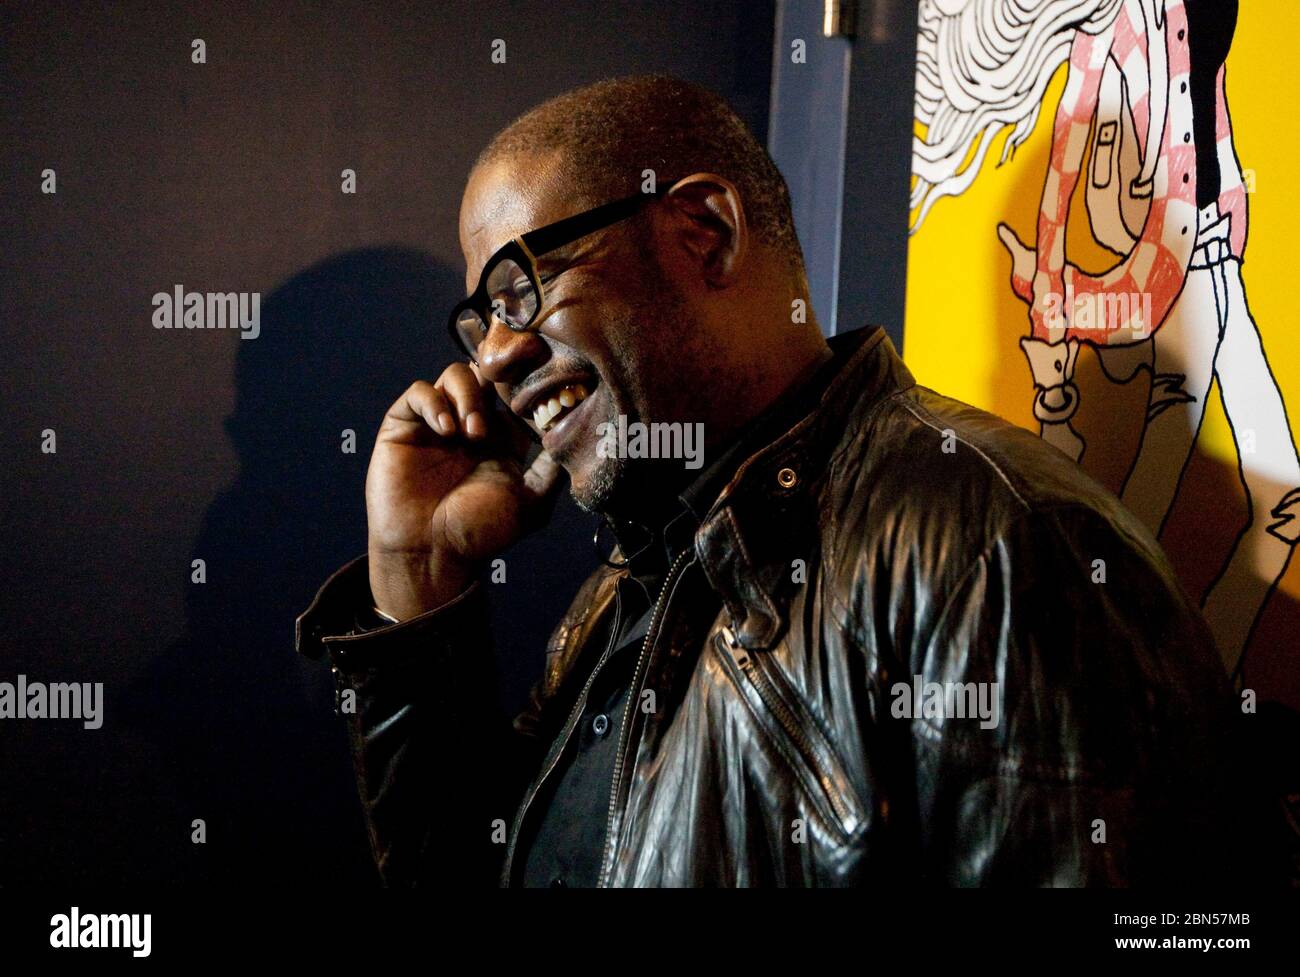 Austin Texas USA, March 10, 2012: Texas-born American Academy Award-winning actor Forest Whitaker at South by Southwest event. ©Marjorie Kamys Cotera/Daemmrich Photography Stock Photo